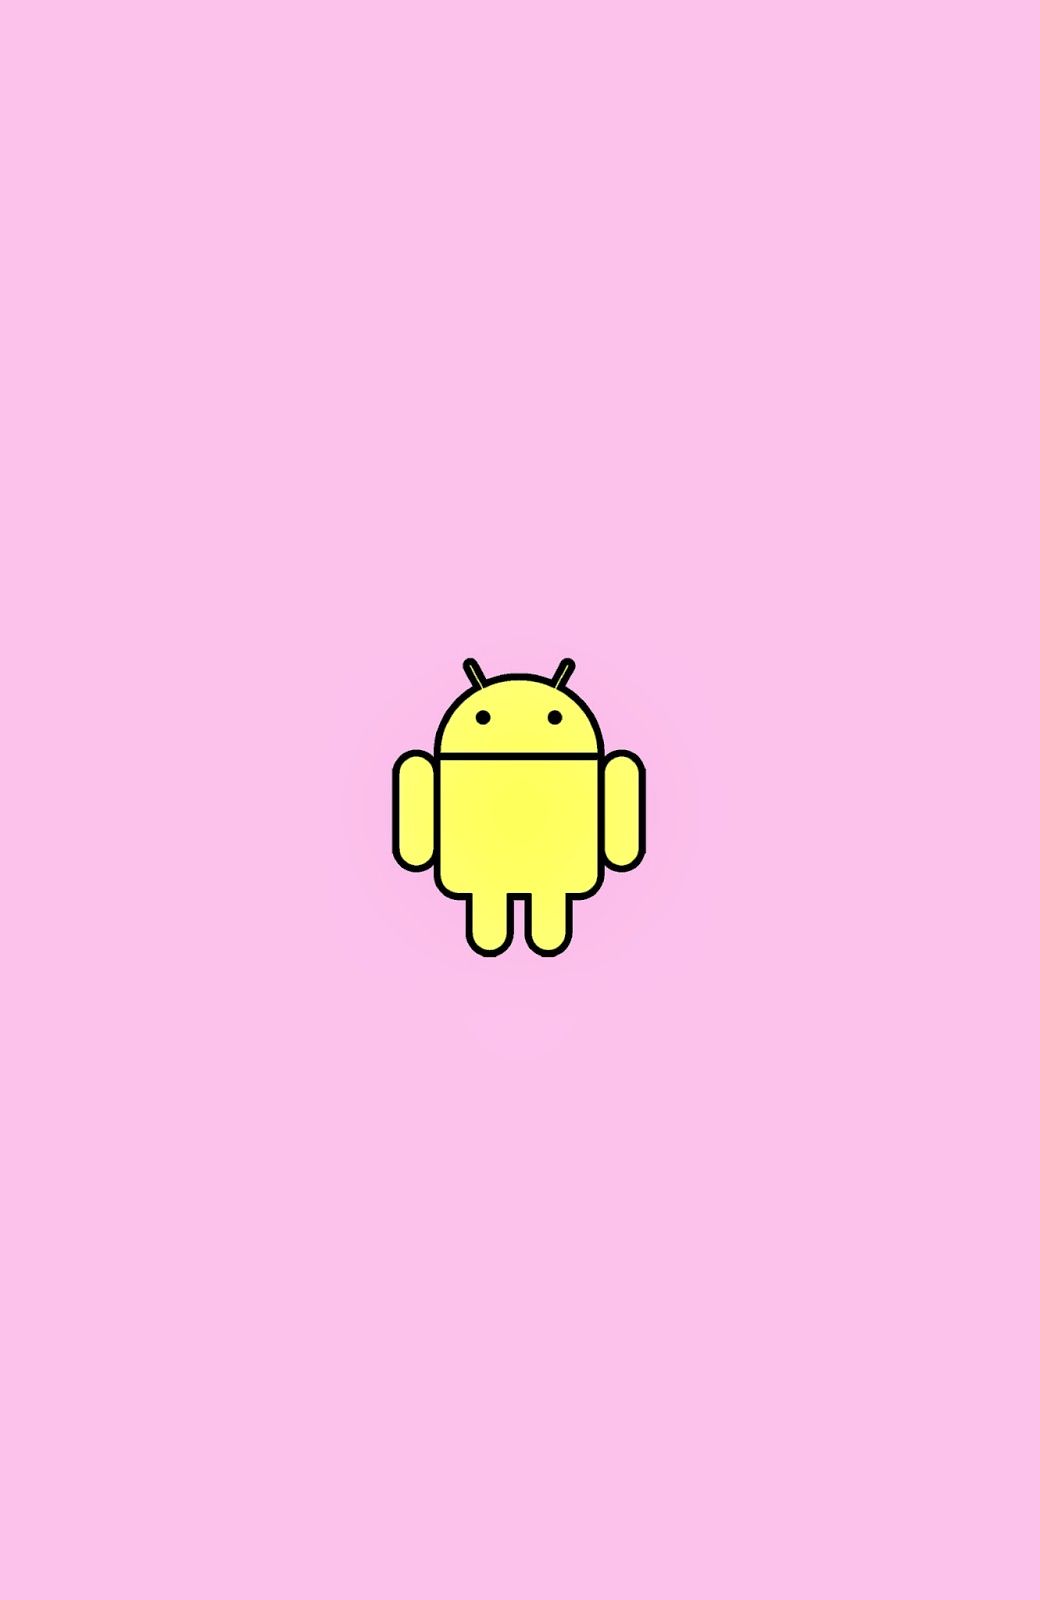 Pink Android Wallpapers